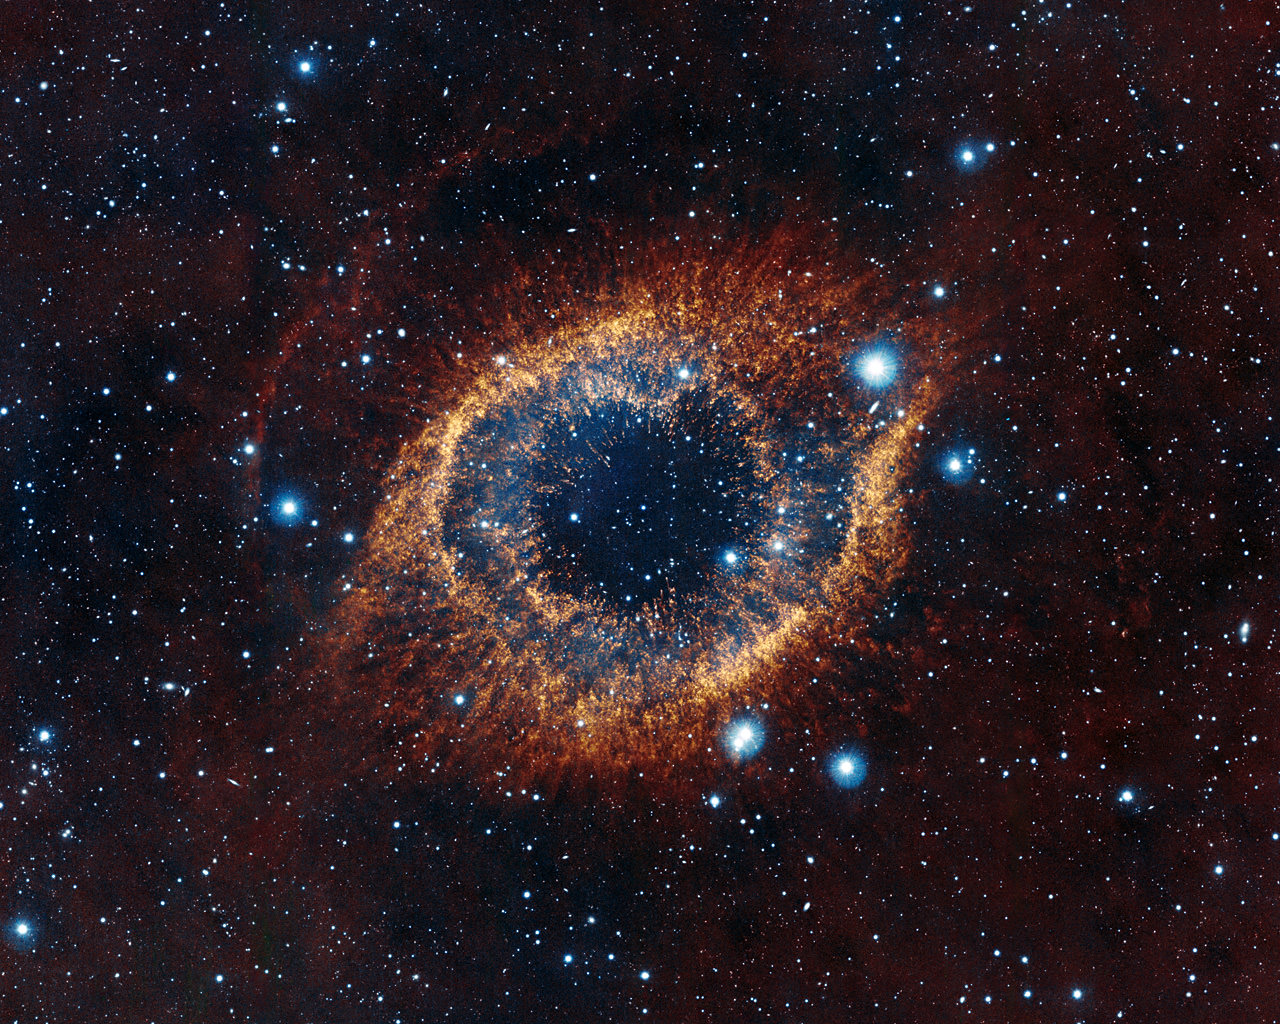 ESO's Visible and Infrared Survey Telescope for Astronomy (VISTA) has captured this unusual view of the Helix Nebula (NGC 7293), a planetary nebula located 700 light-years away. The coloured picture was created from images taken through Y, J and K infrared filters. While bringing to light a rich background of stars and galaxies, the telescope's infrared vision also reveals strands of cold nebular gas that are mostly obscured in visible images of the Helix. 